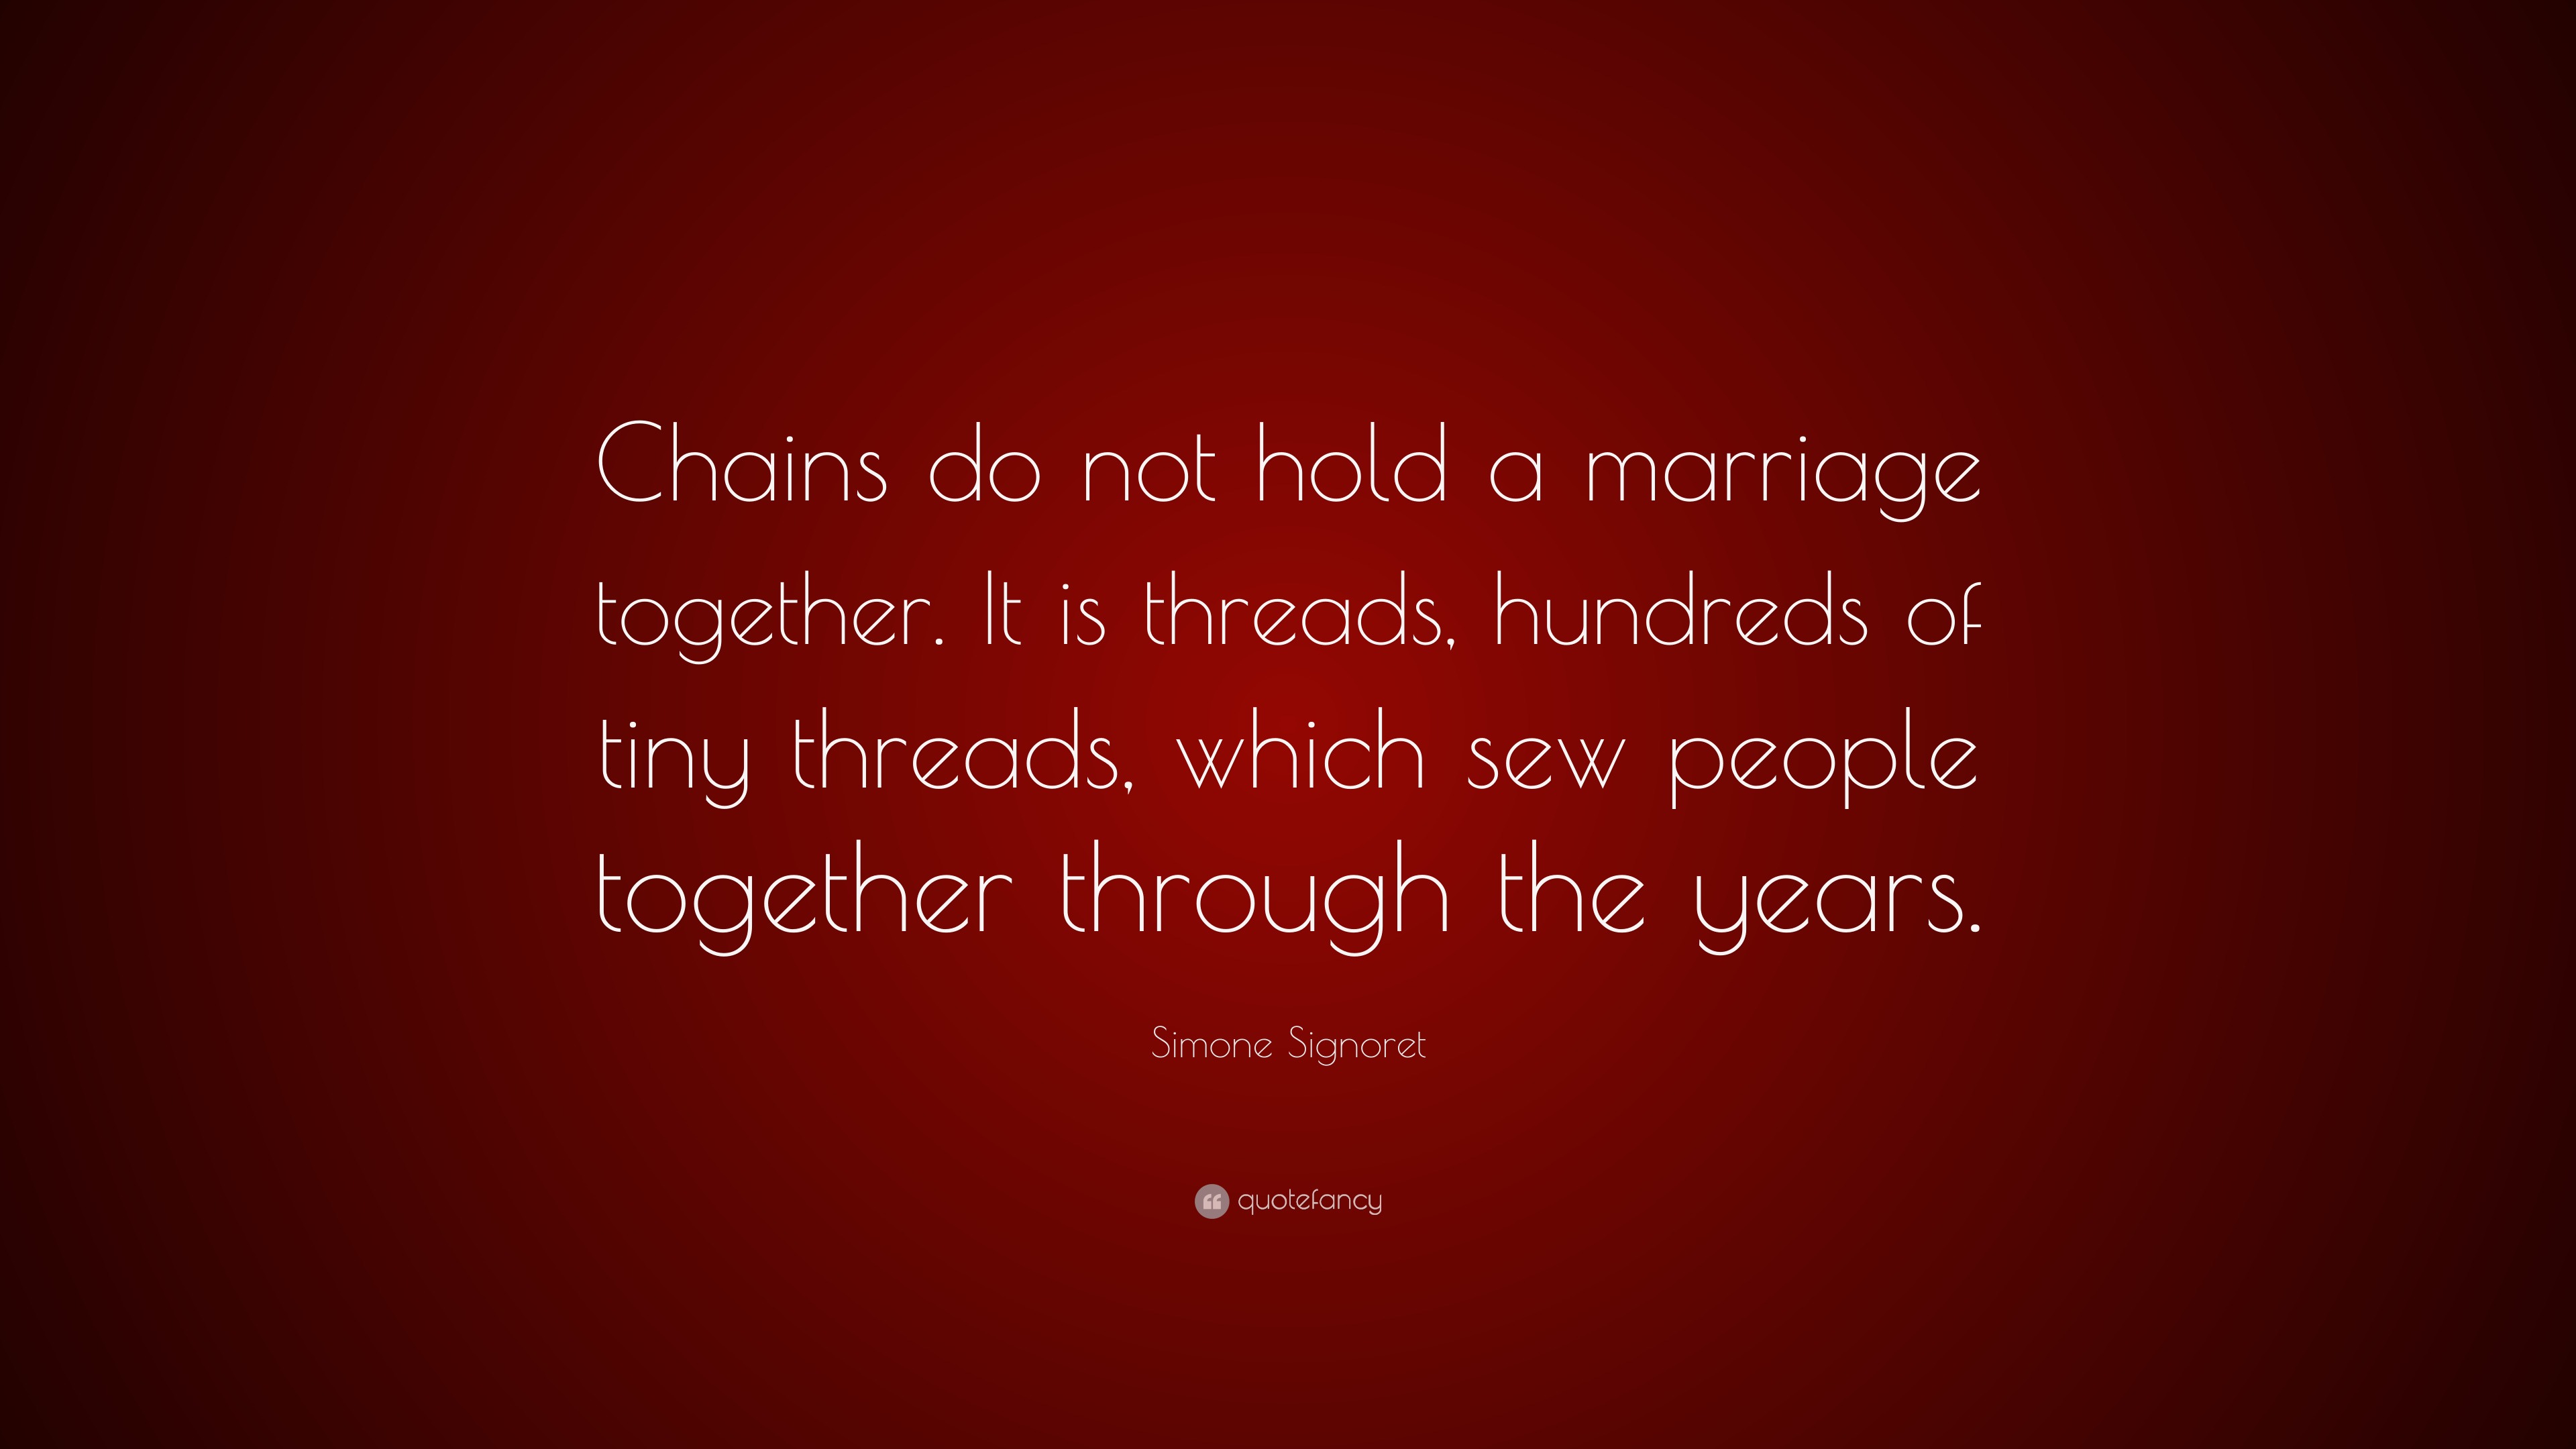 Simone Signoret Quote: "Chains do not hold a marriage together. It is threads, hundreds of tiny ...